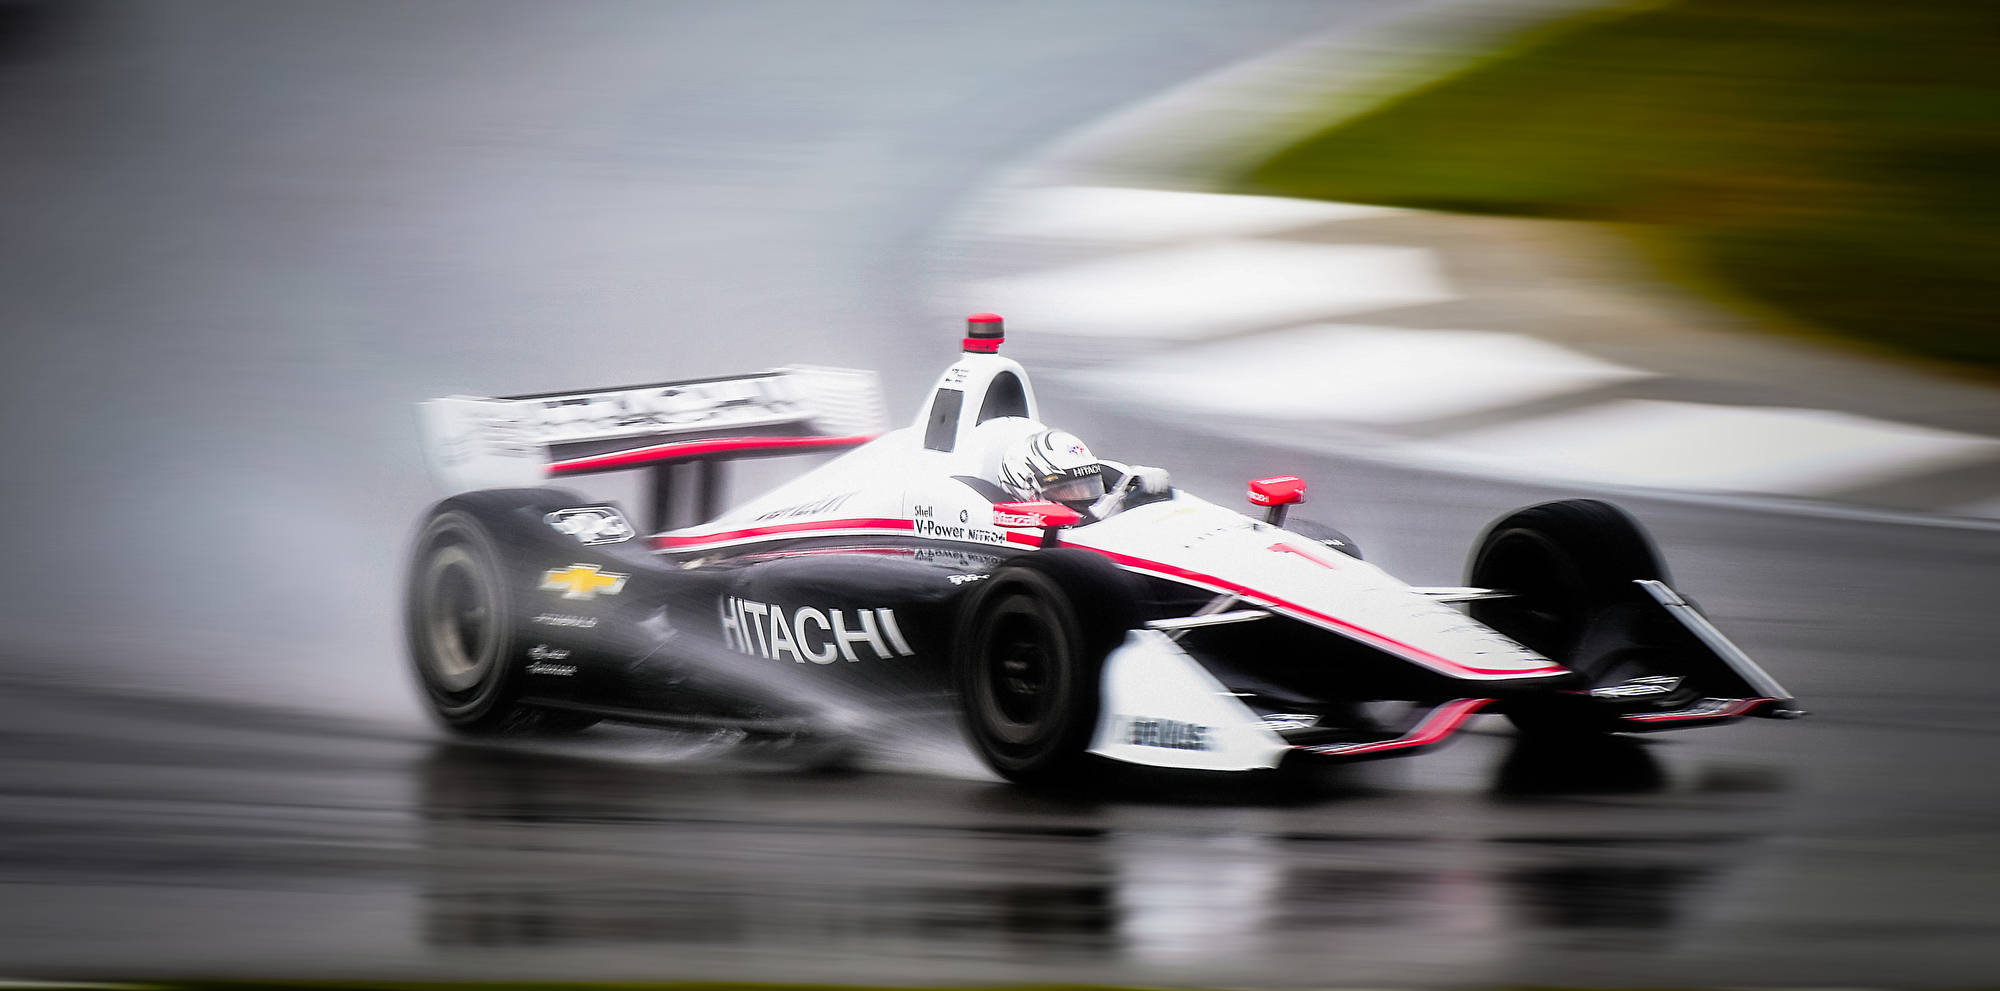 Newgarden won in the rain but hardly anyone saw it - on both Sunday (first 22 laps) or Monday's finale